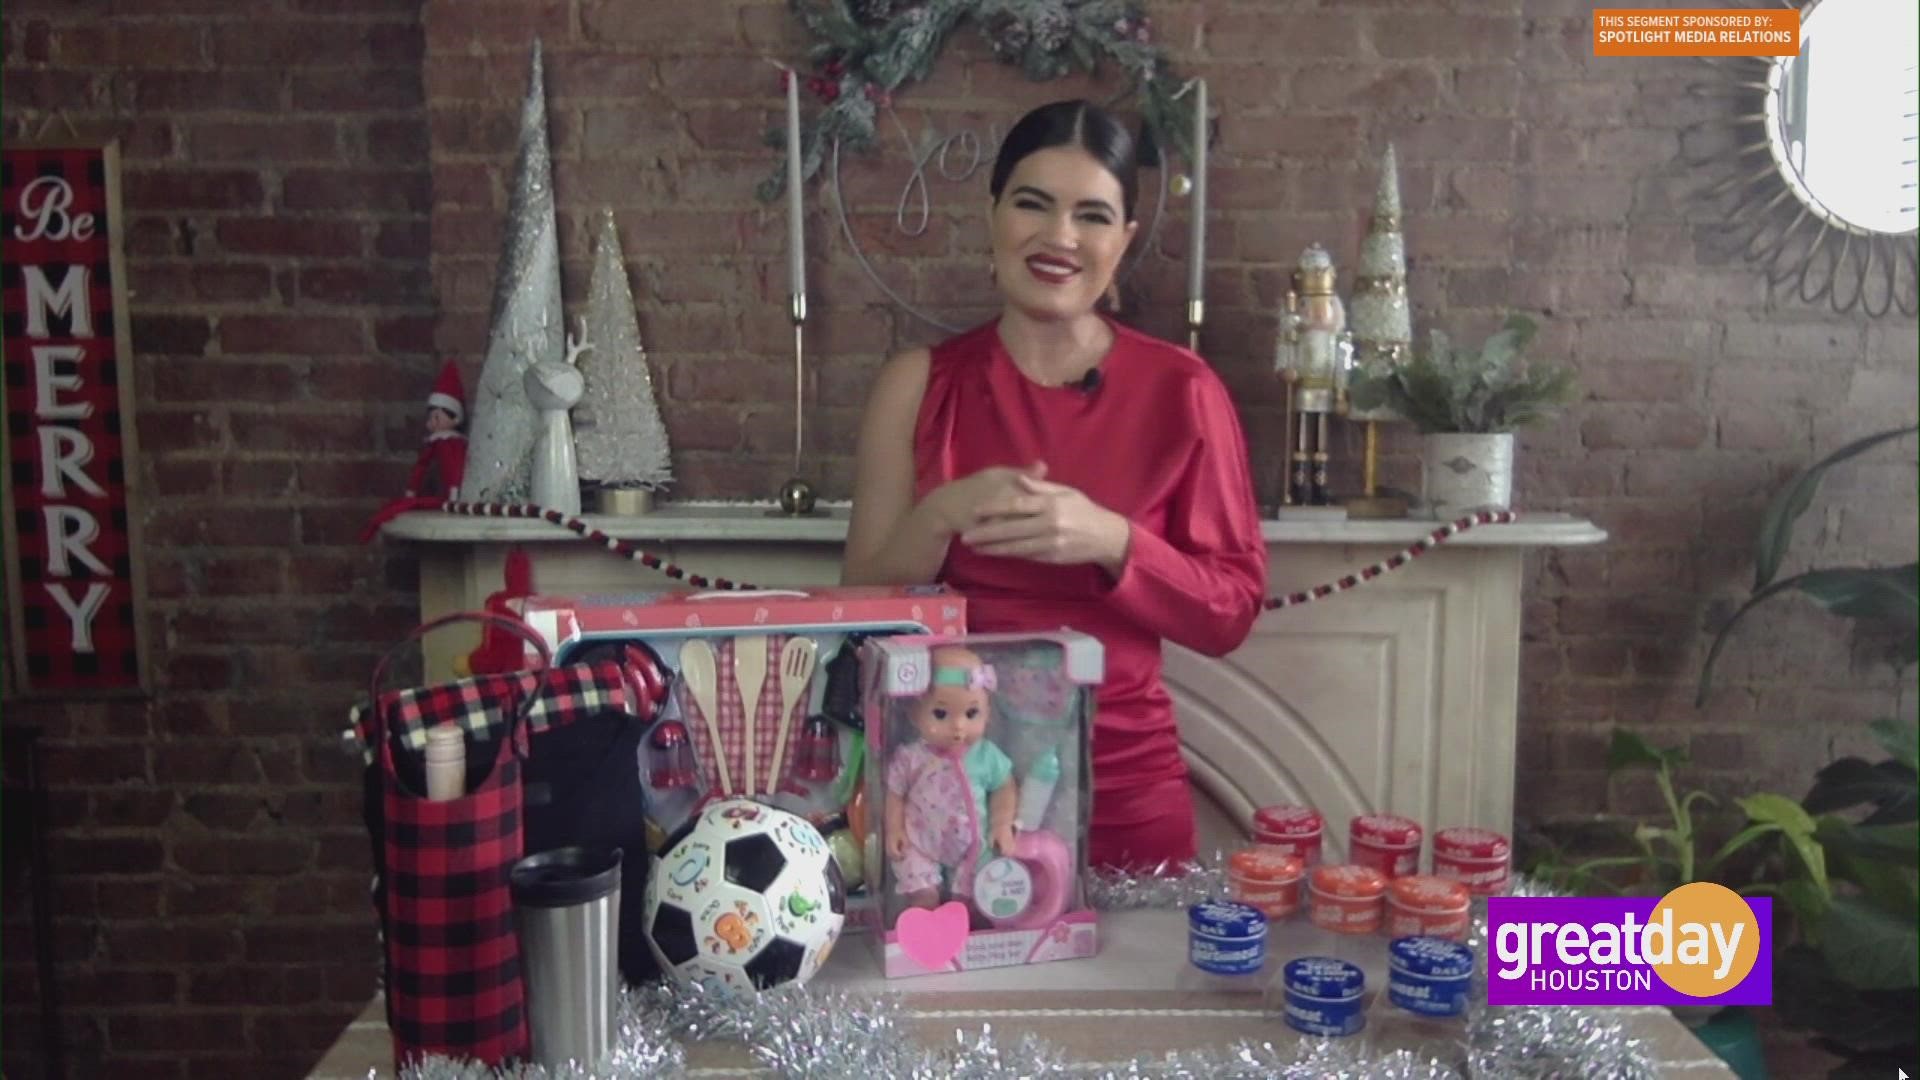 Lifestyle Expert, Kathy Buccio shares her top holiday gift ideas.